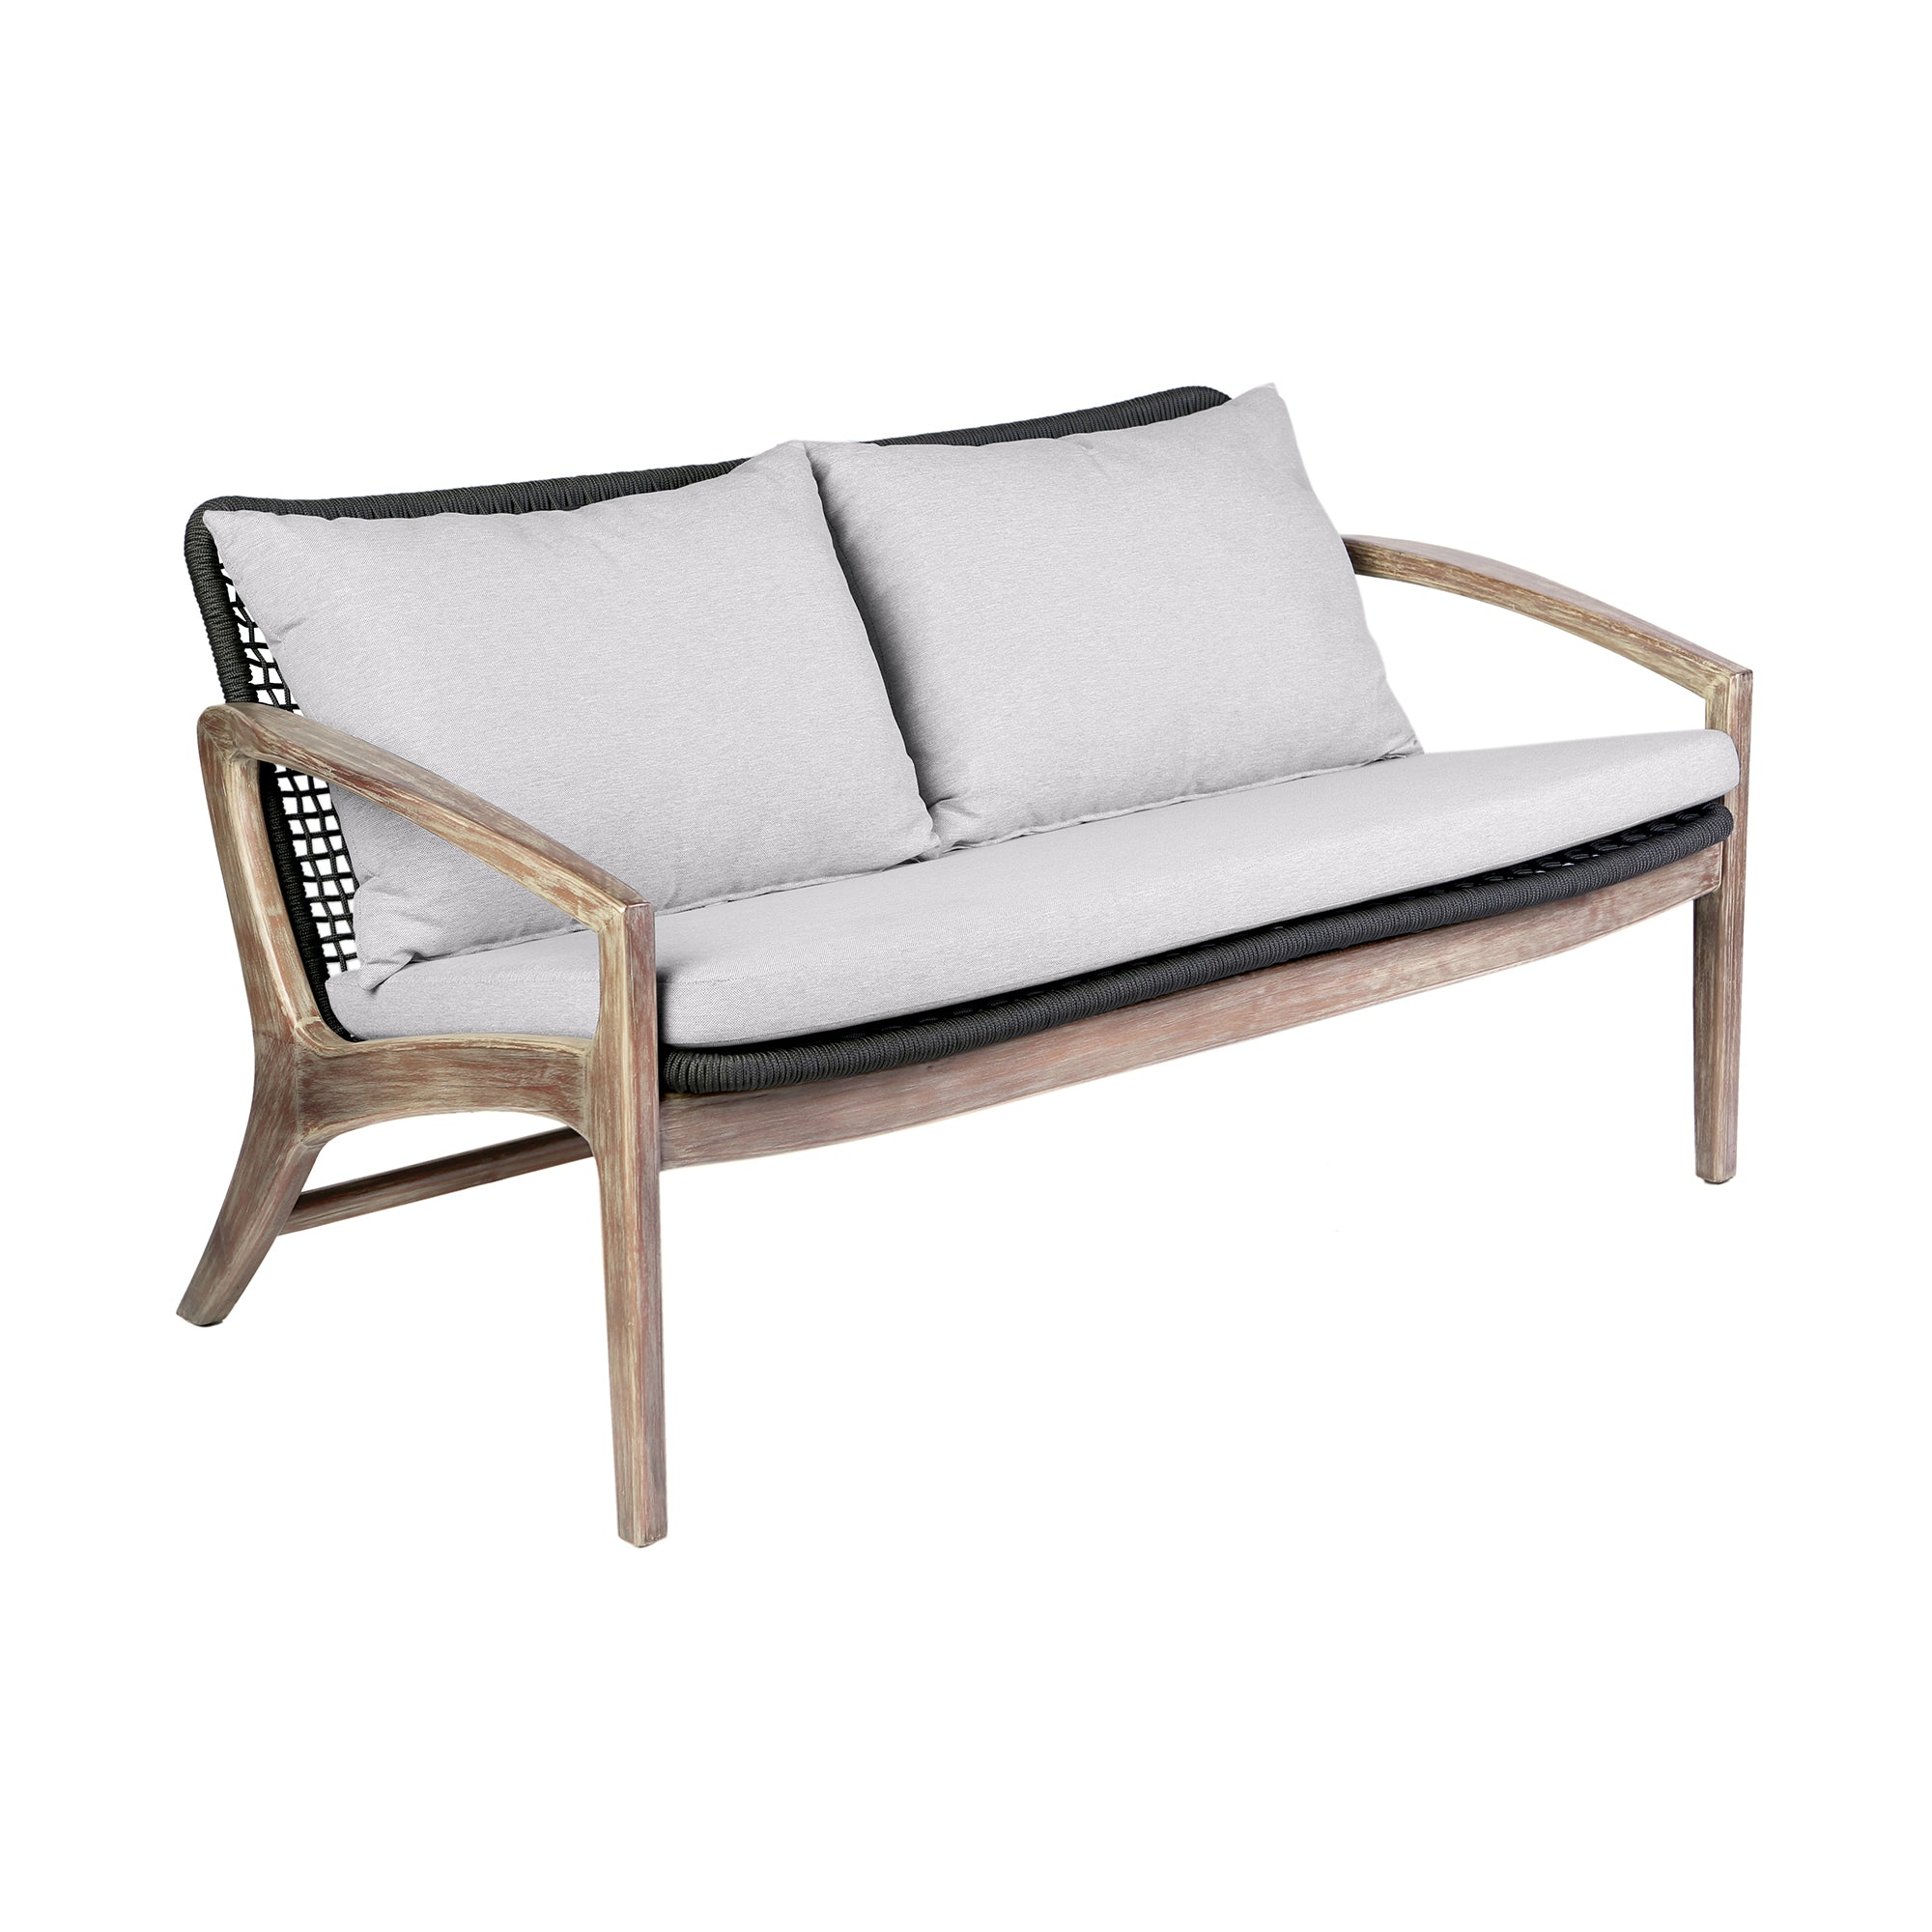 Armen Living - Brighton 4 Piece Outdoor Patio Seating Set in Eucalyptus Wood with Rope and White Cushions - 840254336155